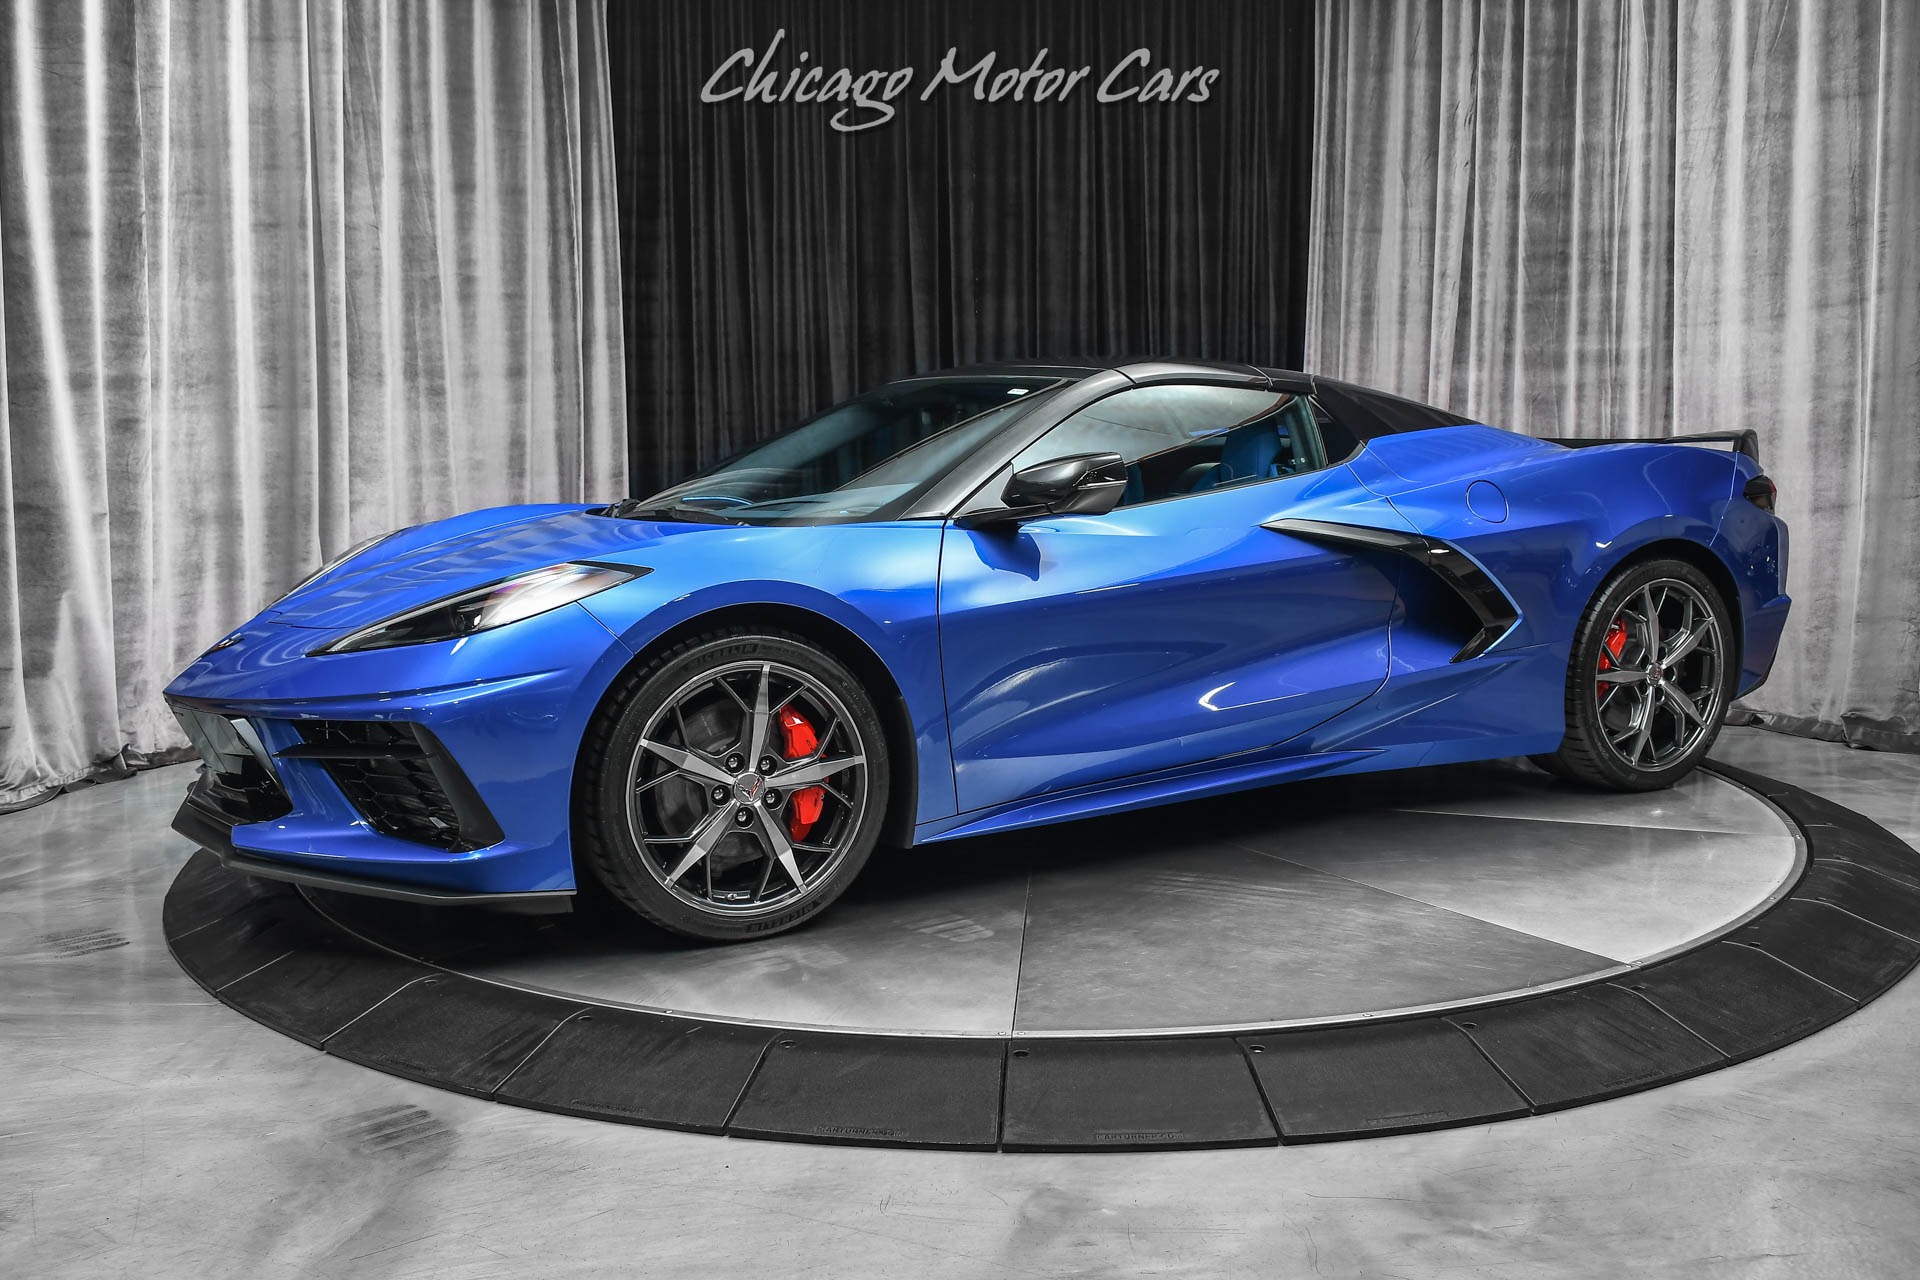 Used-2022-Chevrolet-Corvette-Stingray-3LT-Z51-Convertible-Front-Lift-Stunning-Color-Combo-Front-PPF